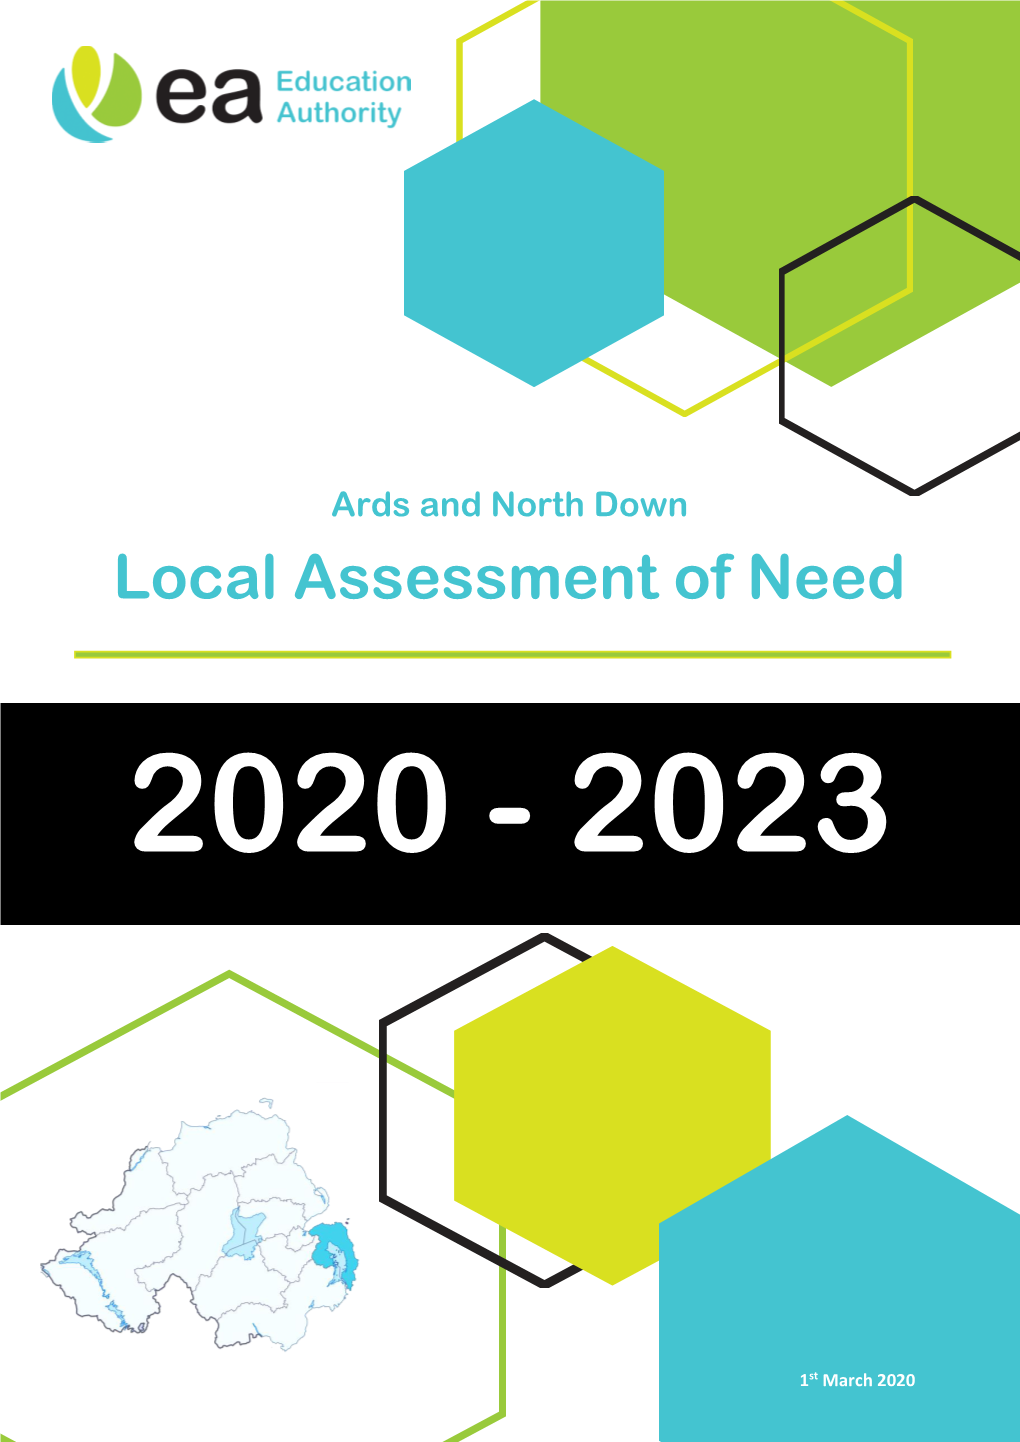 Ards and North Down Local Assessment of Need 2020 - 2023